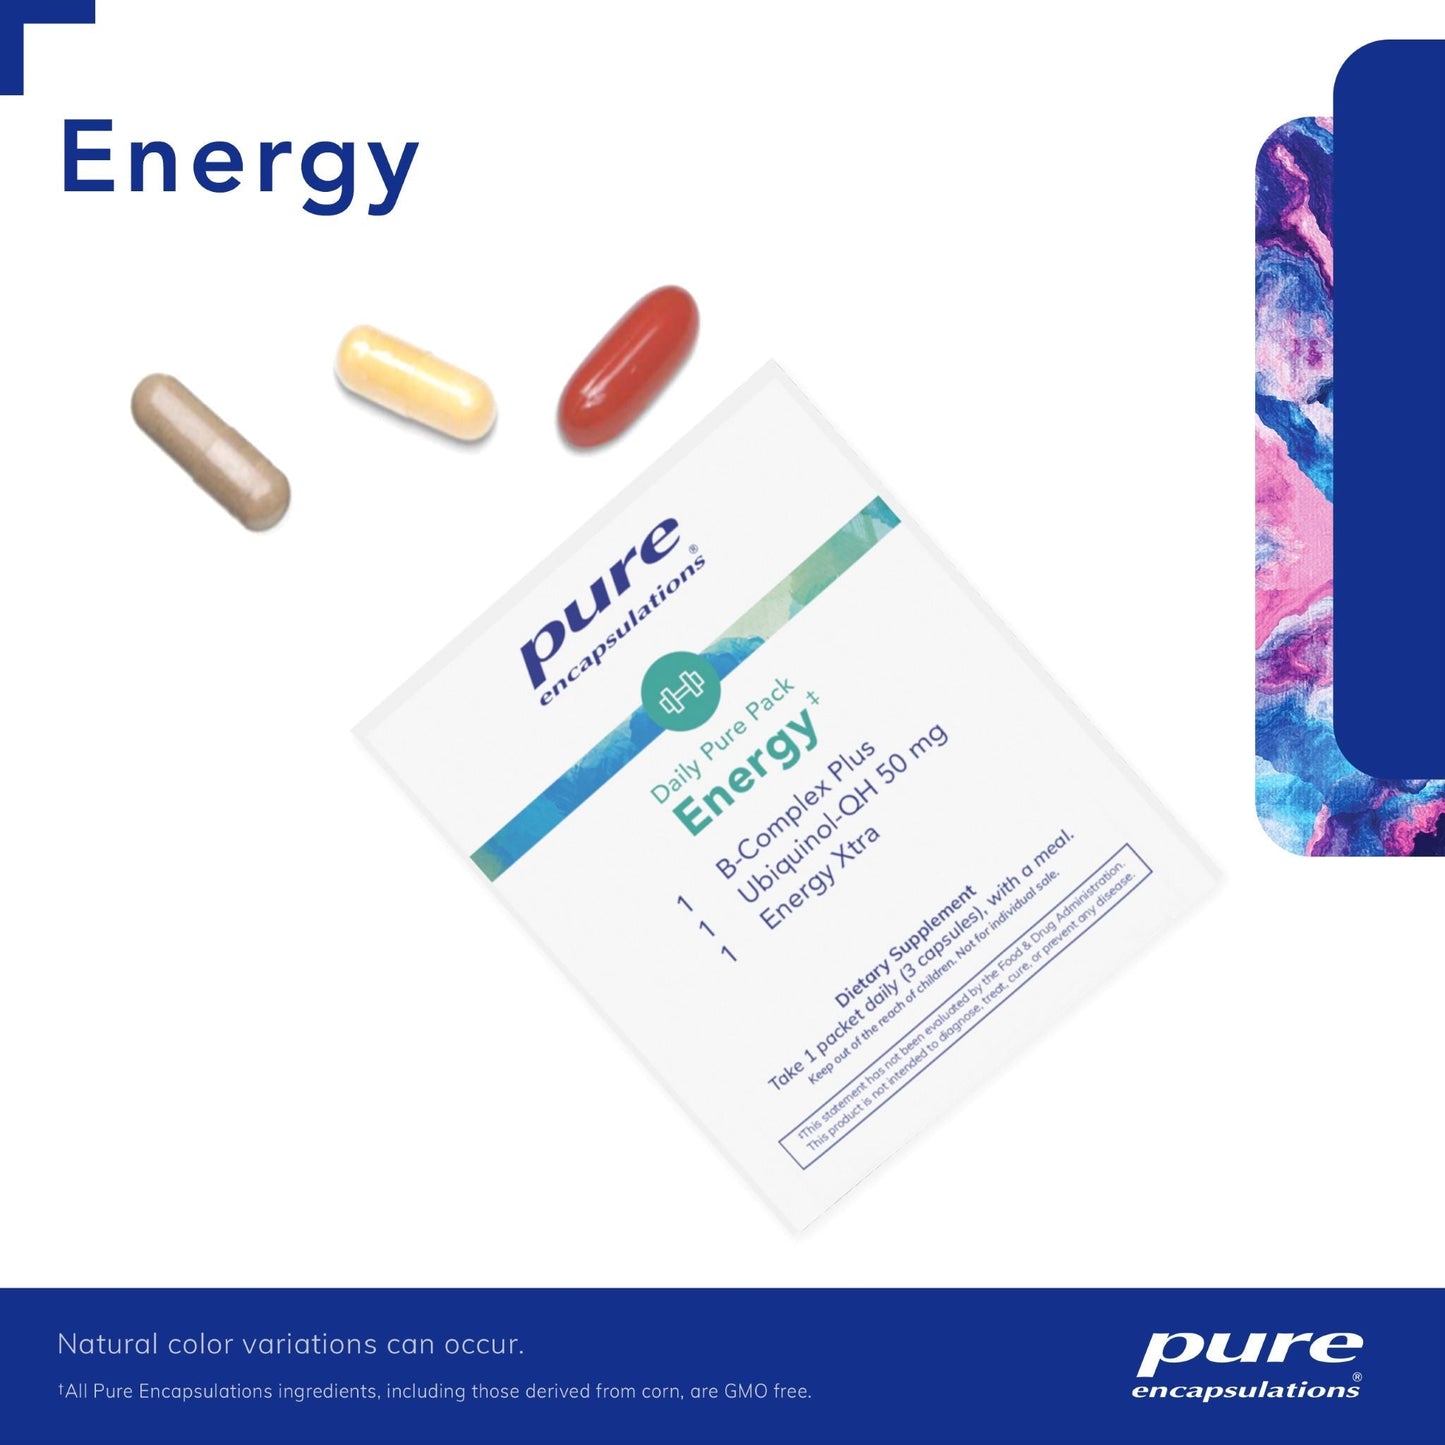 Daily Pure Pack - Energy